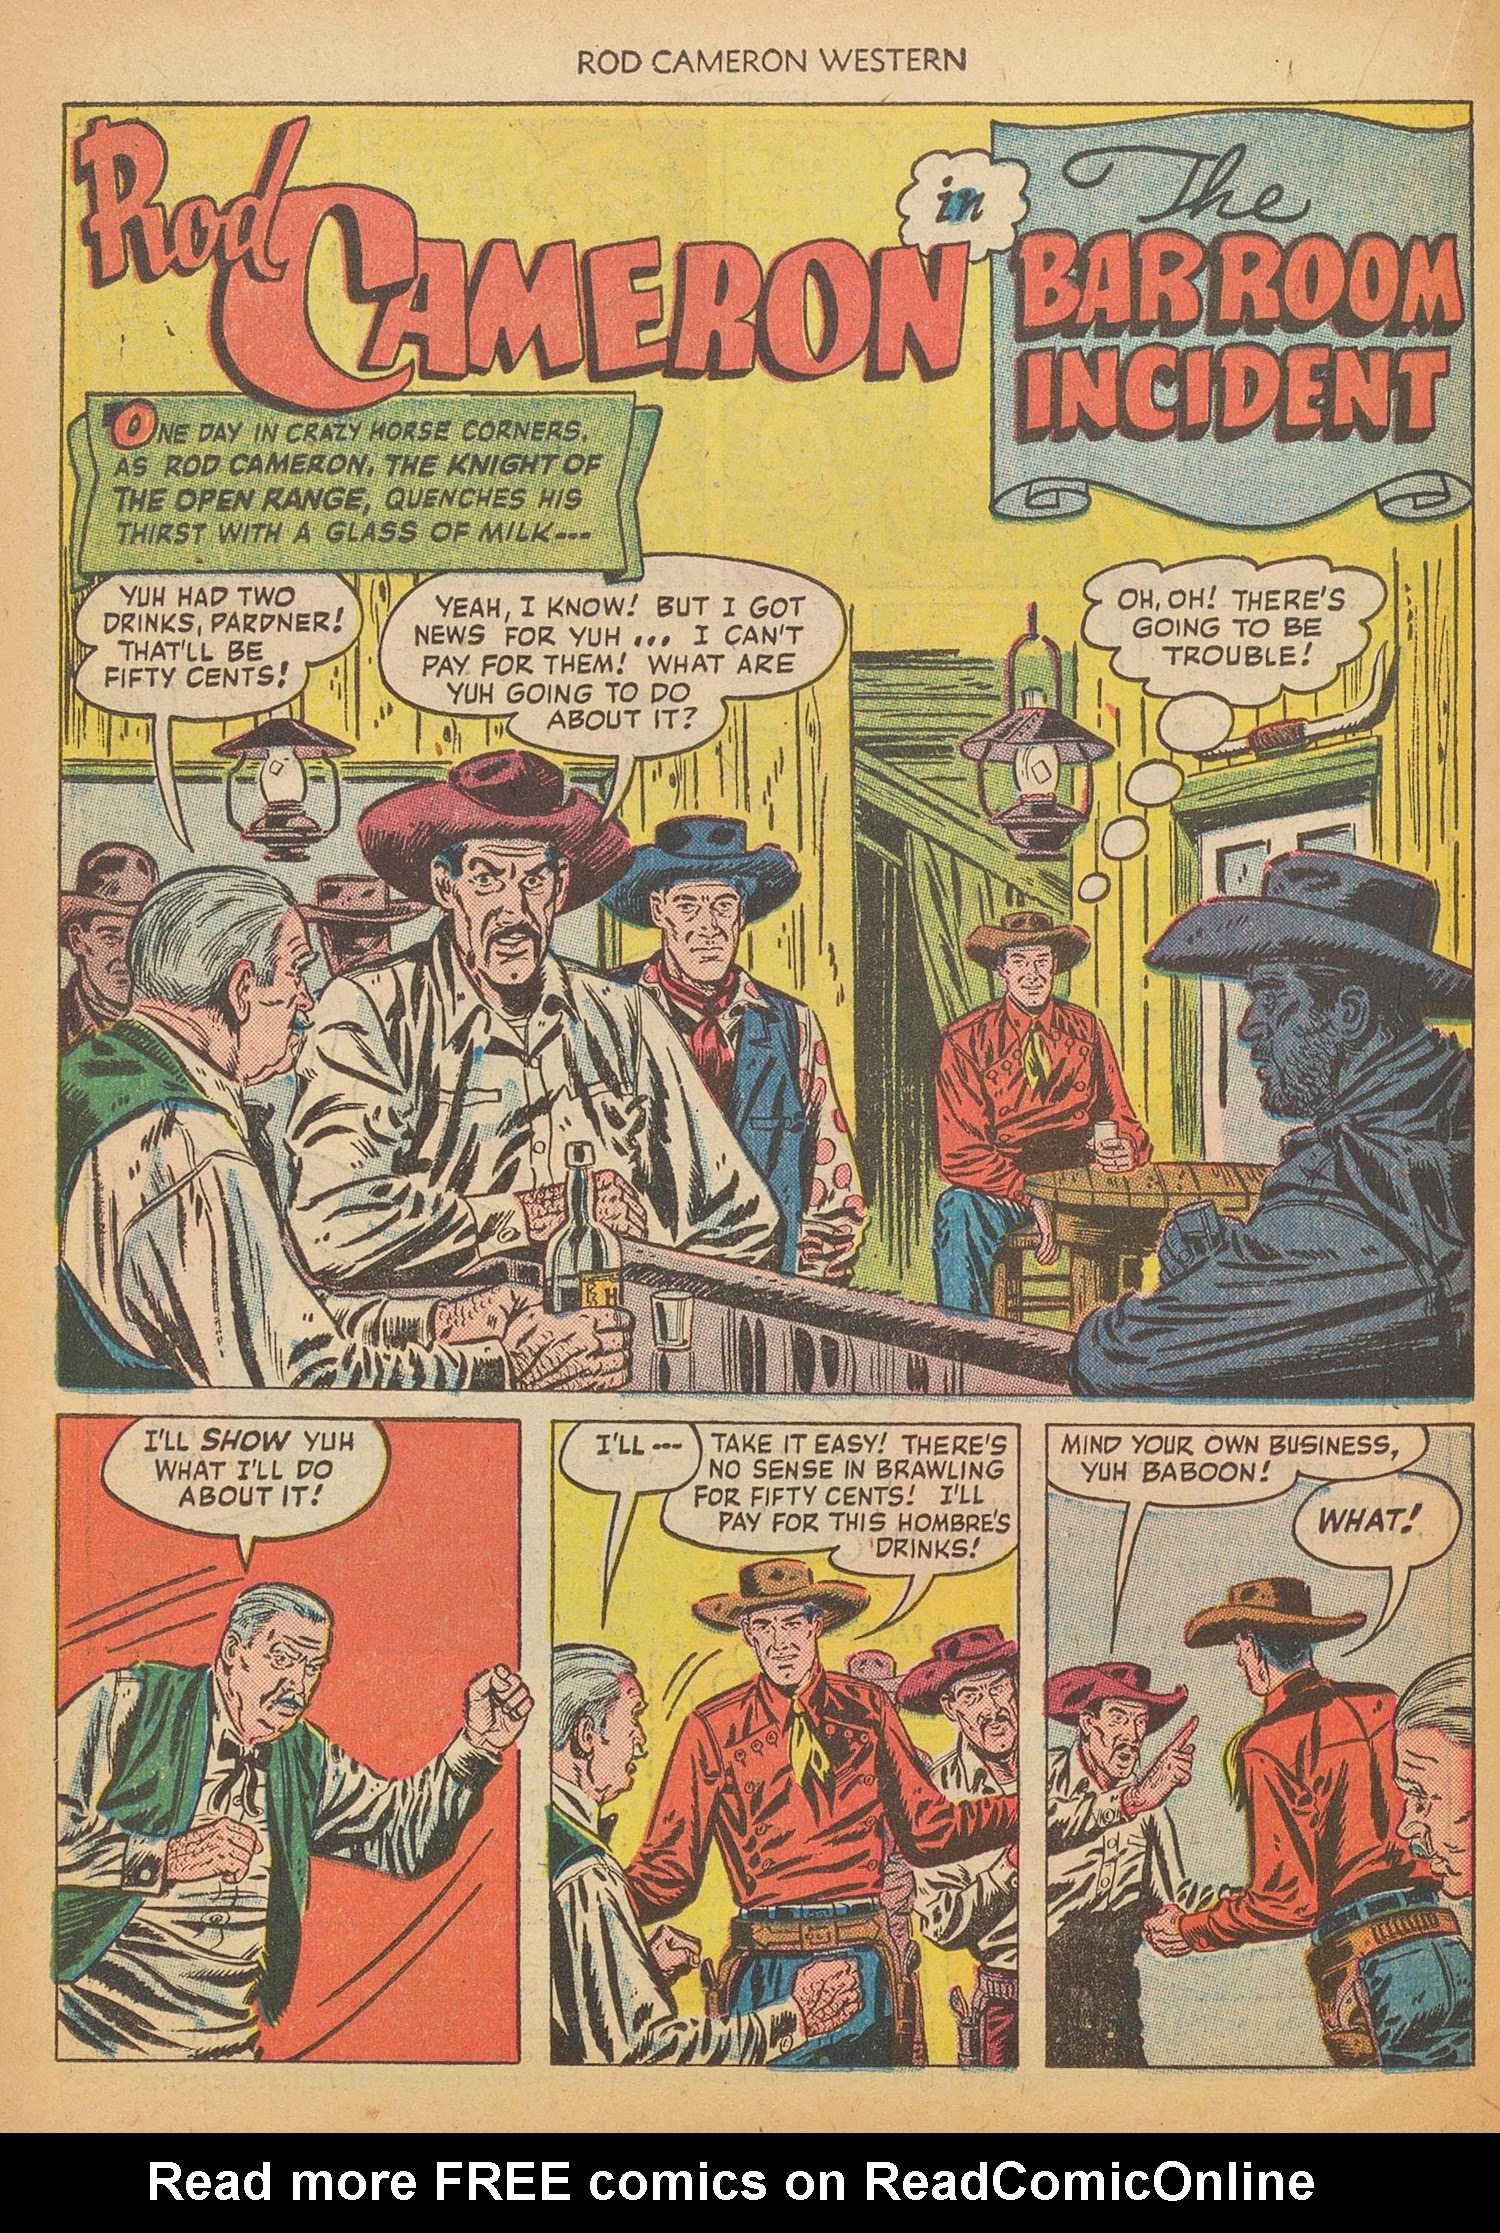 Read online Rod Cameron Western comic -  Issue #16 - 18